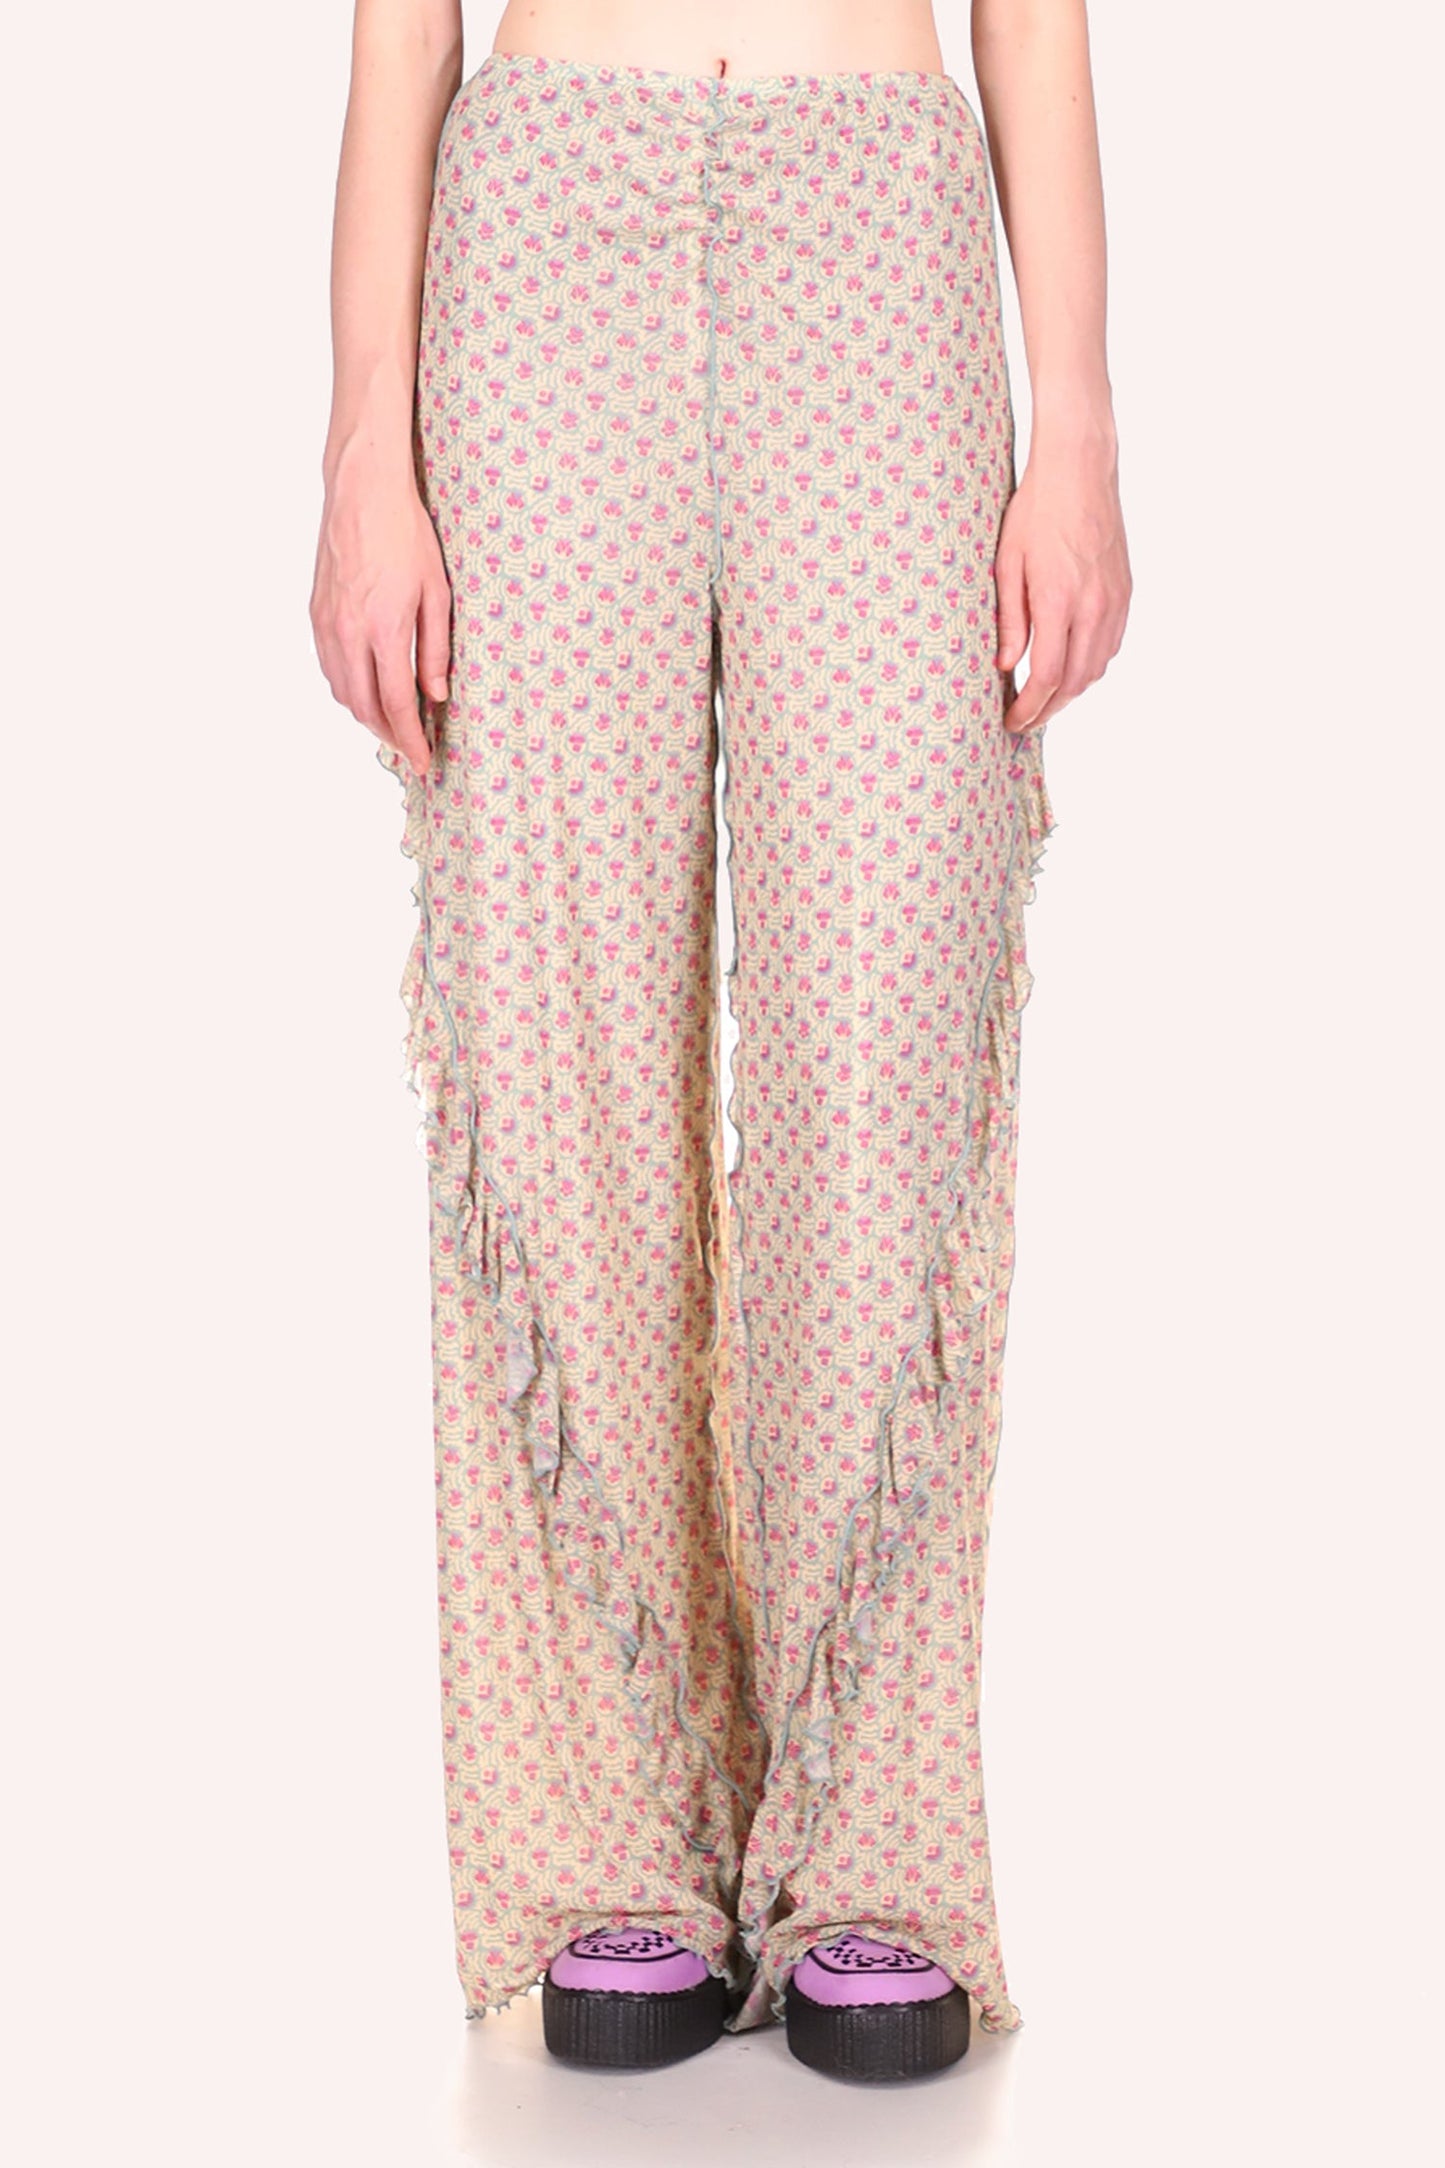 Rosebuds Mesh Pants beige, pink rosebud pattern, ruffle ribbon from the hips to foot on each side